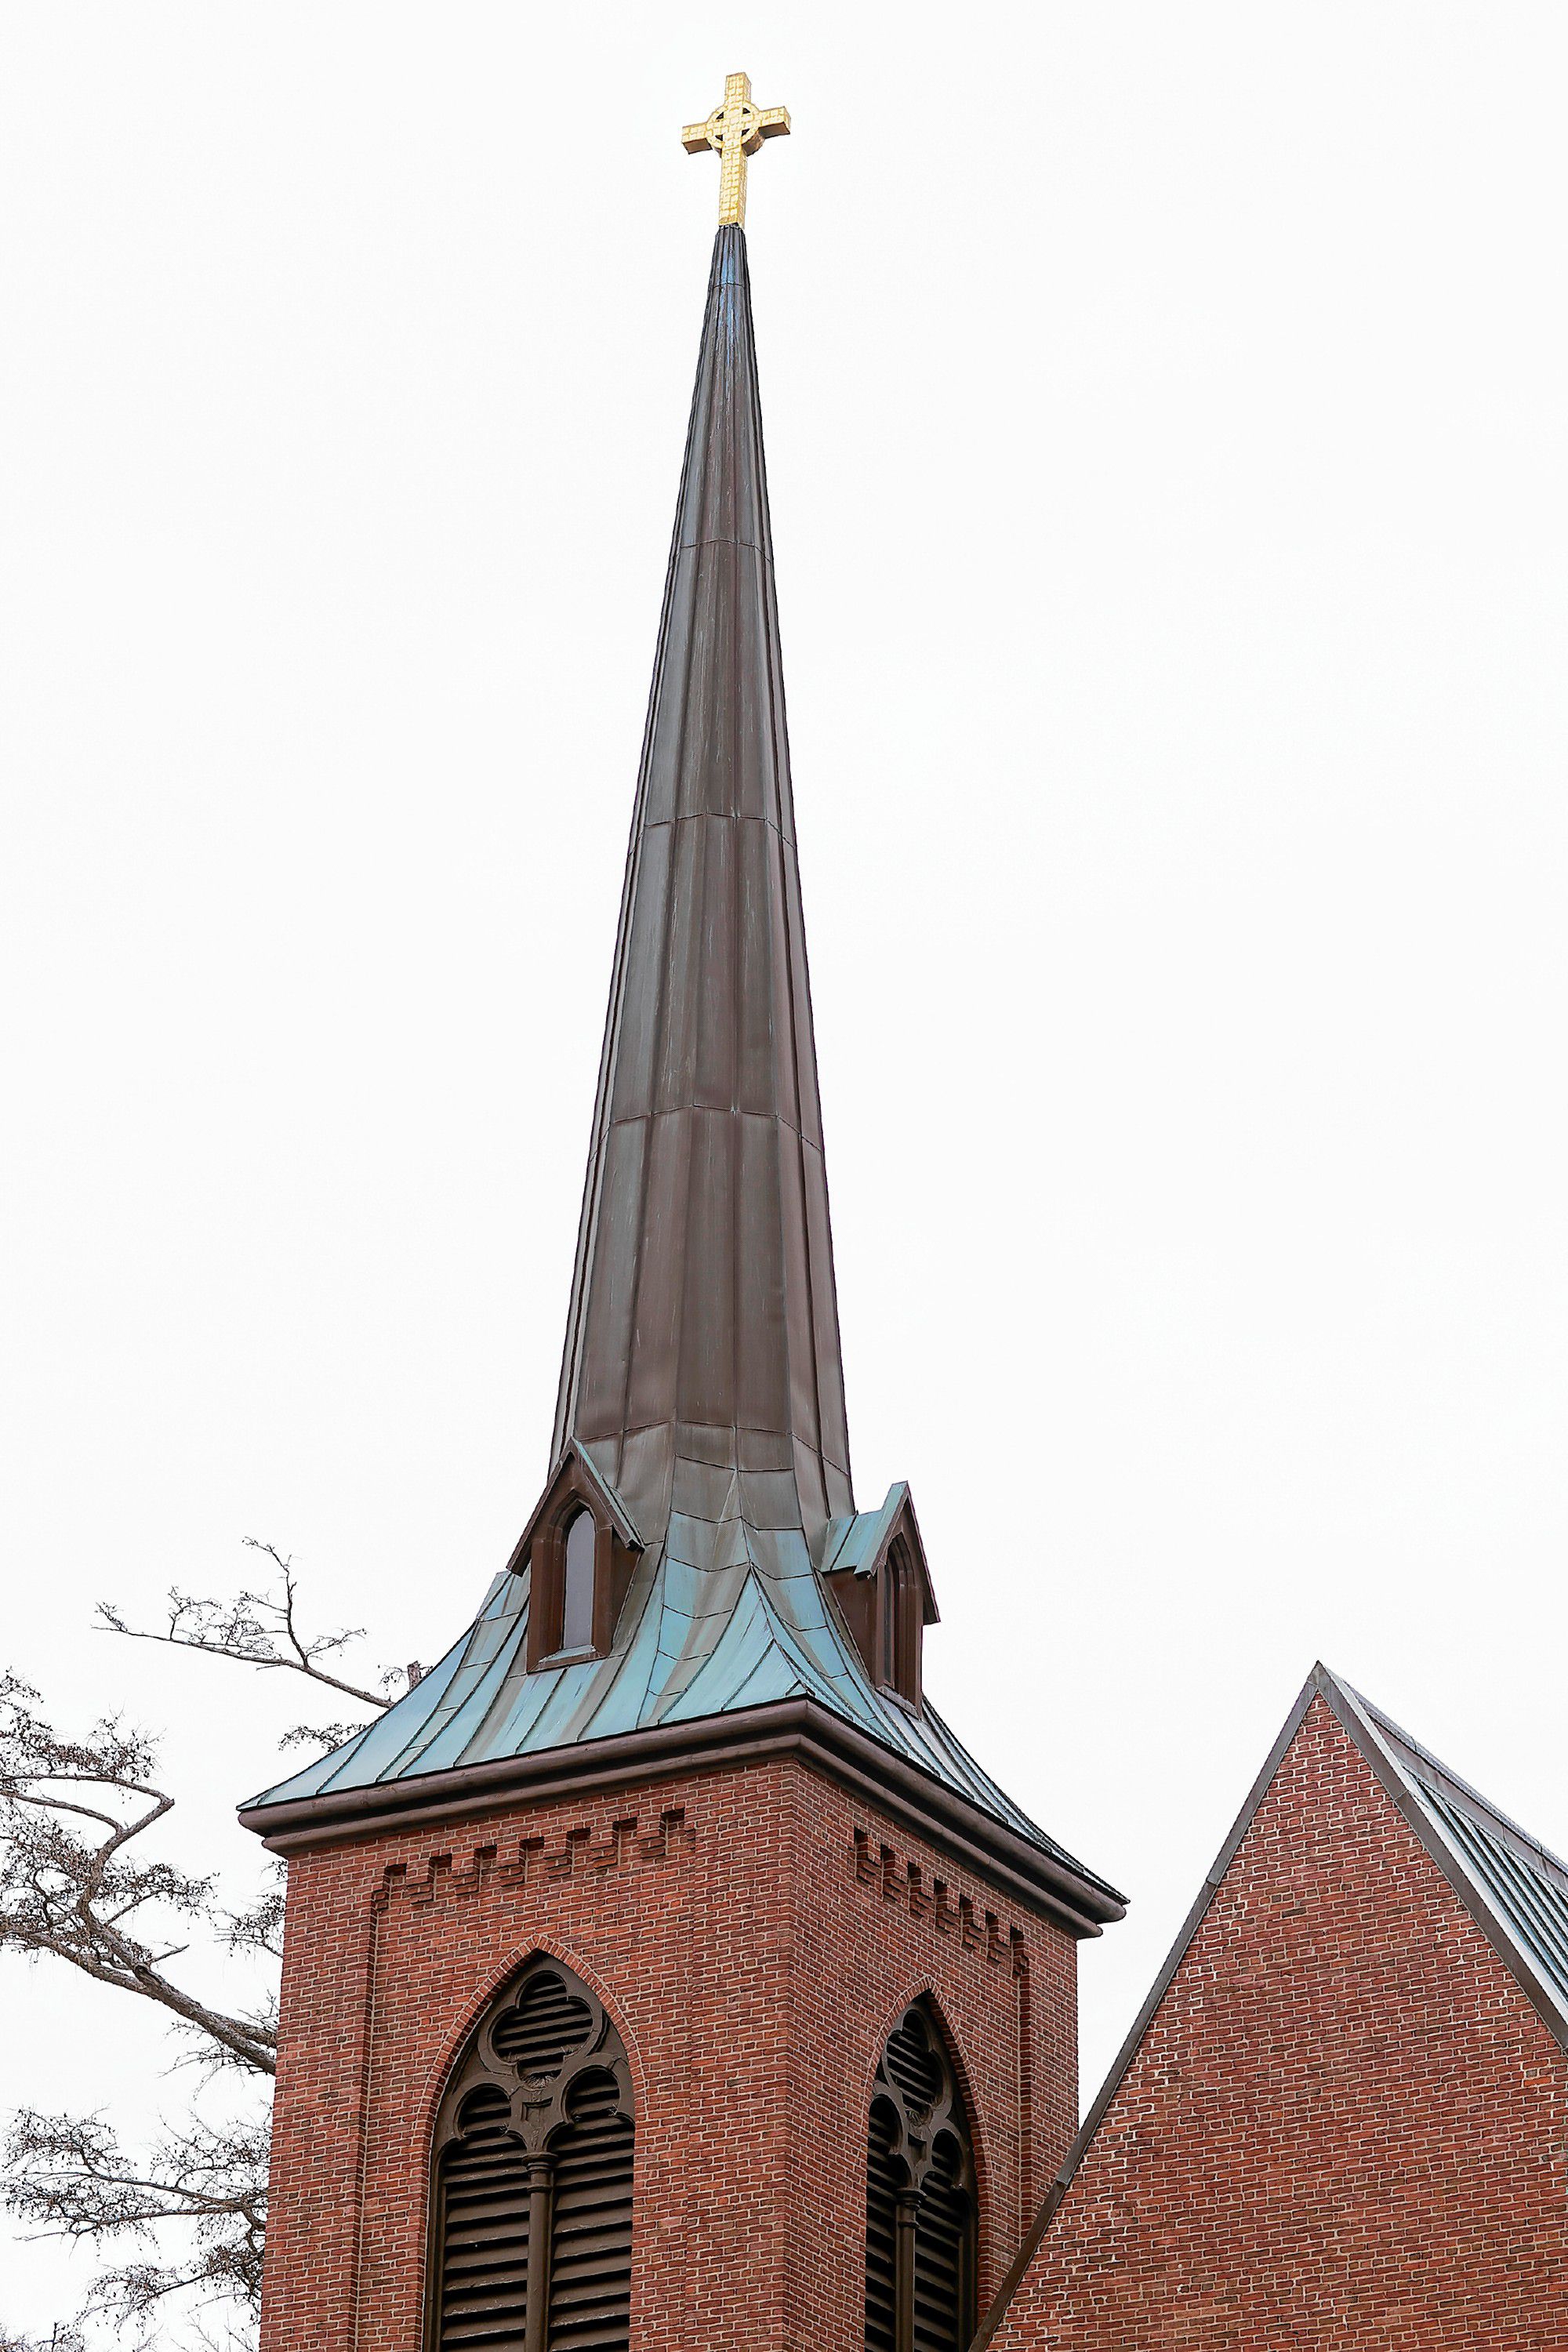 The steeple of St. Paul’s Episcopal Church in downtown Concord.